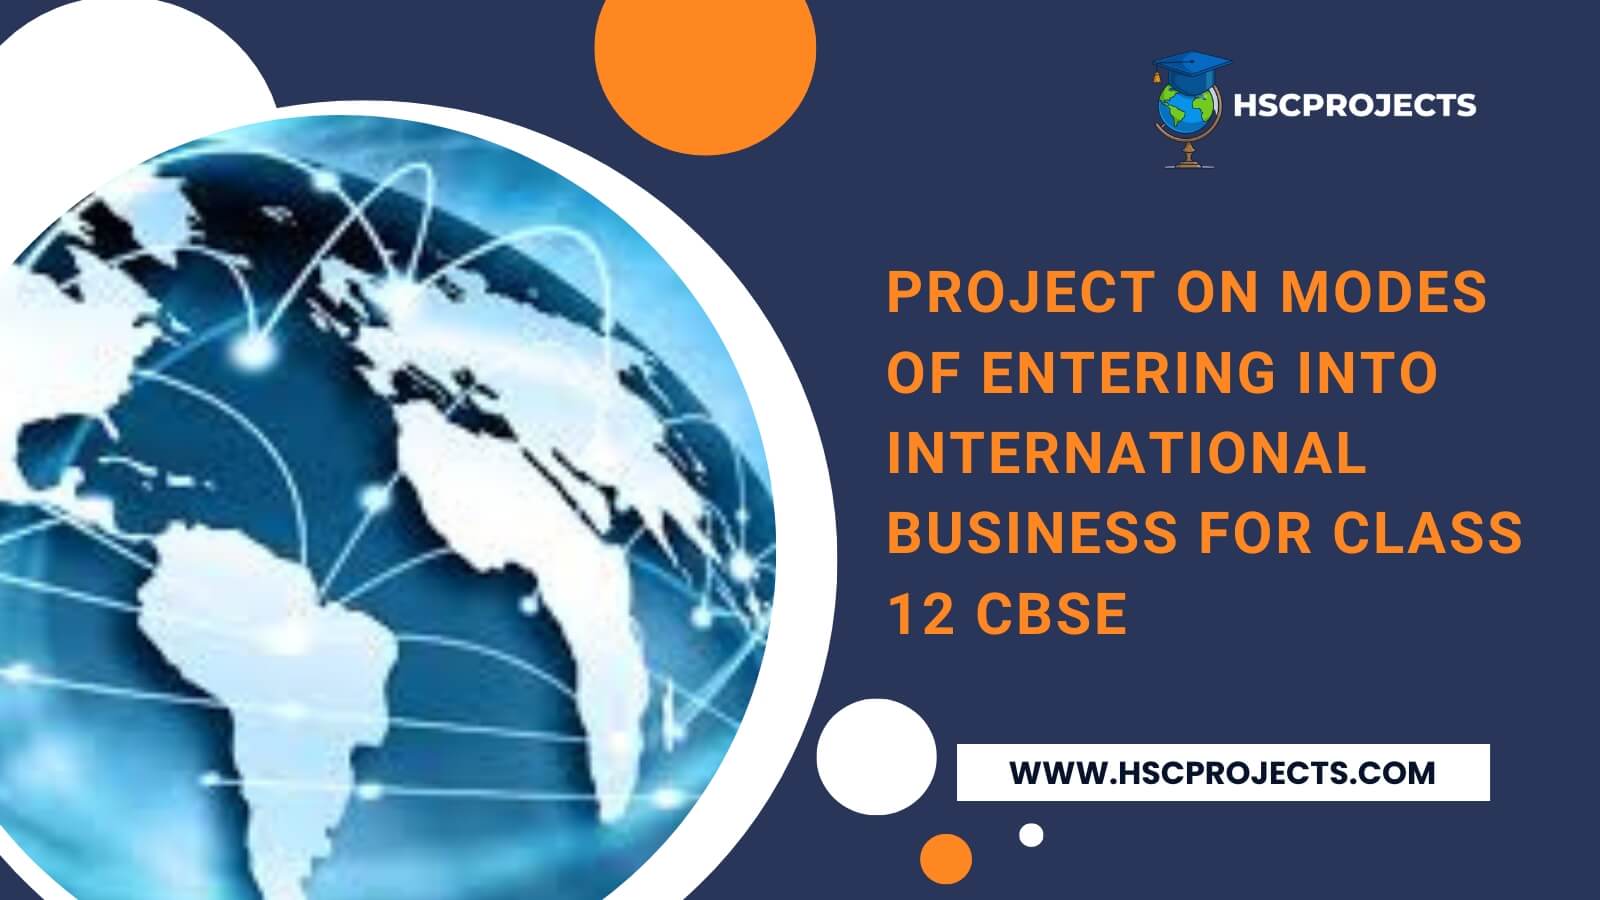 Project On Modes Of Entering Into International Business For Class 12 CBSE